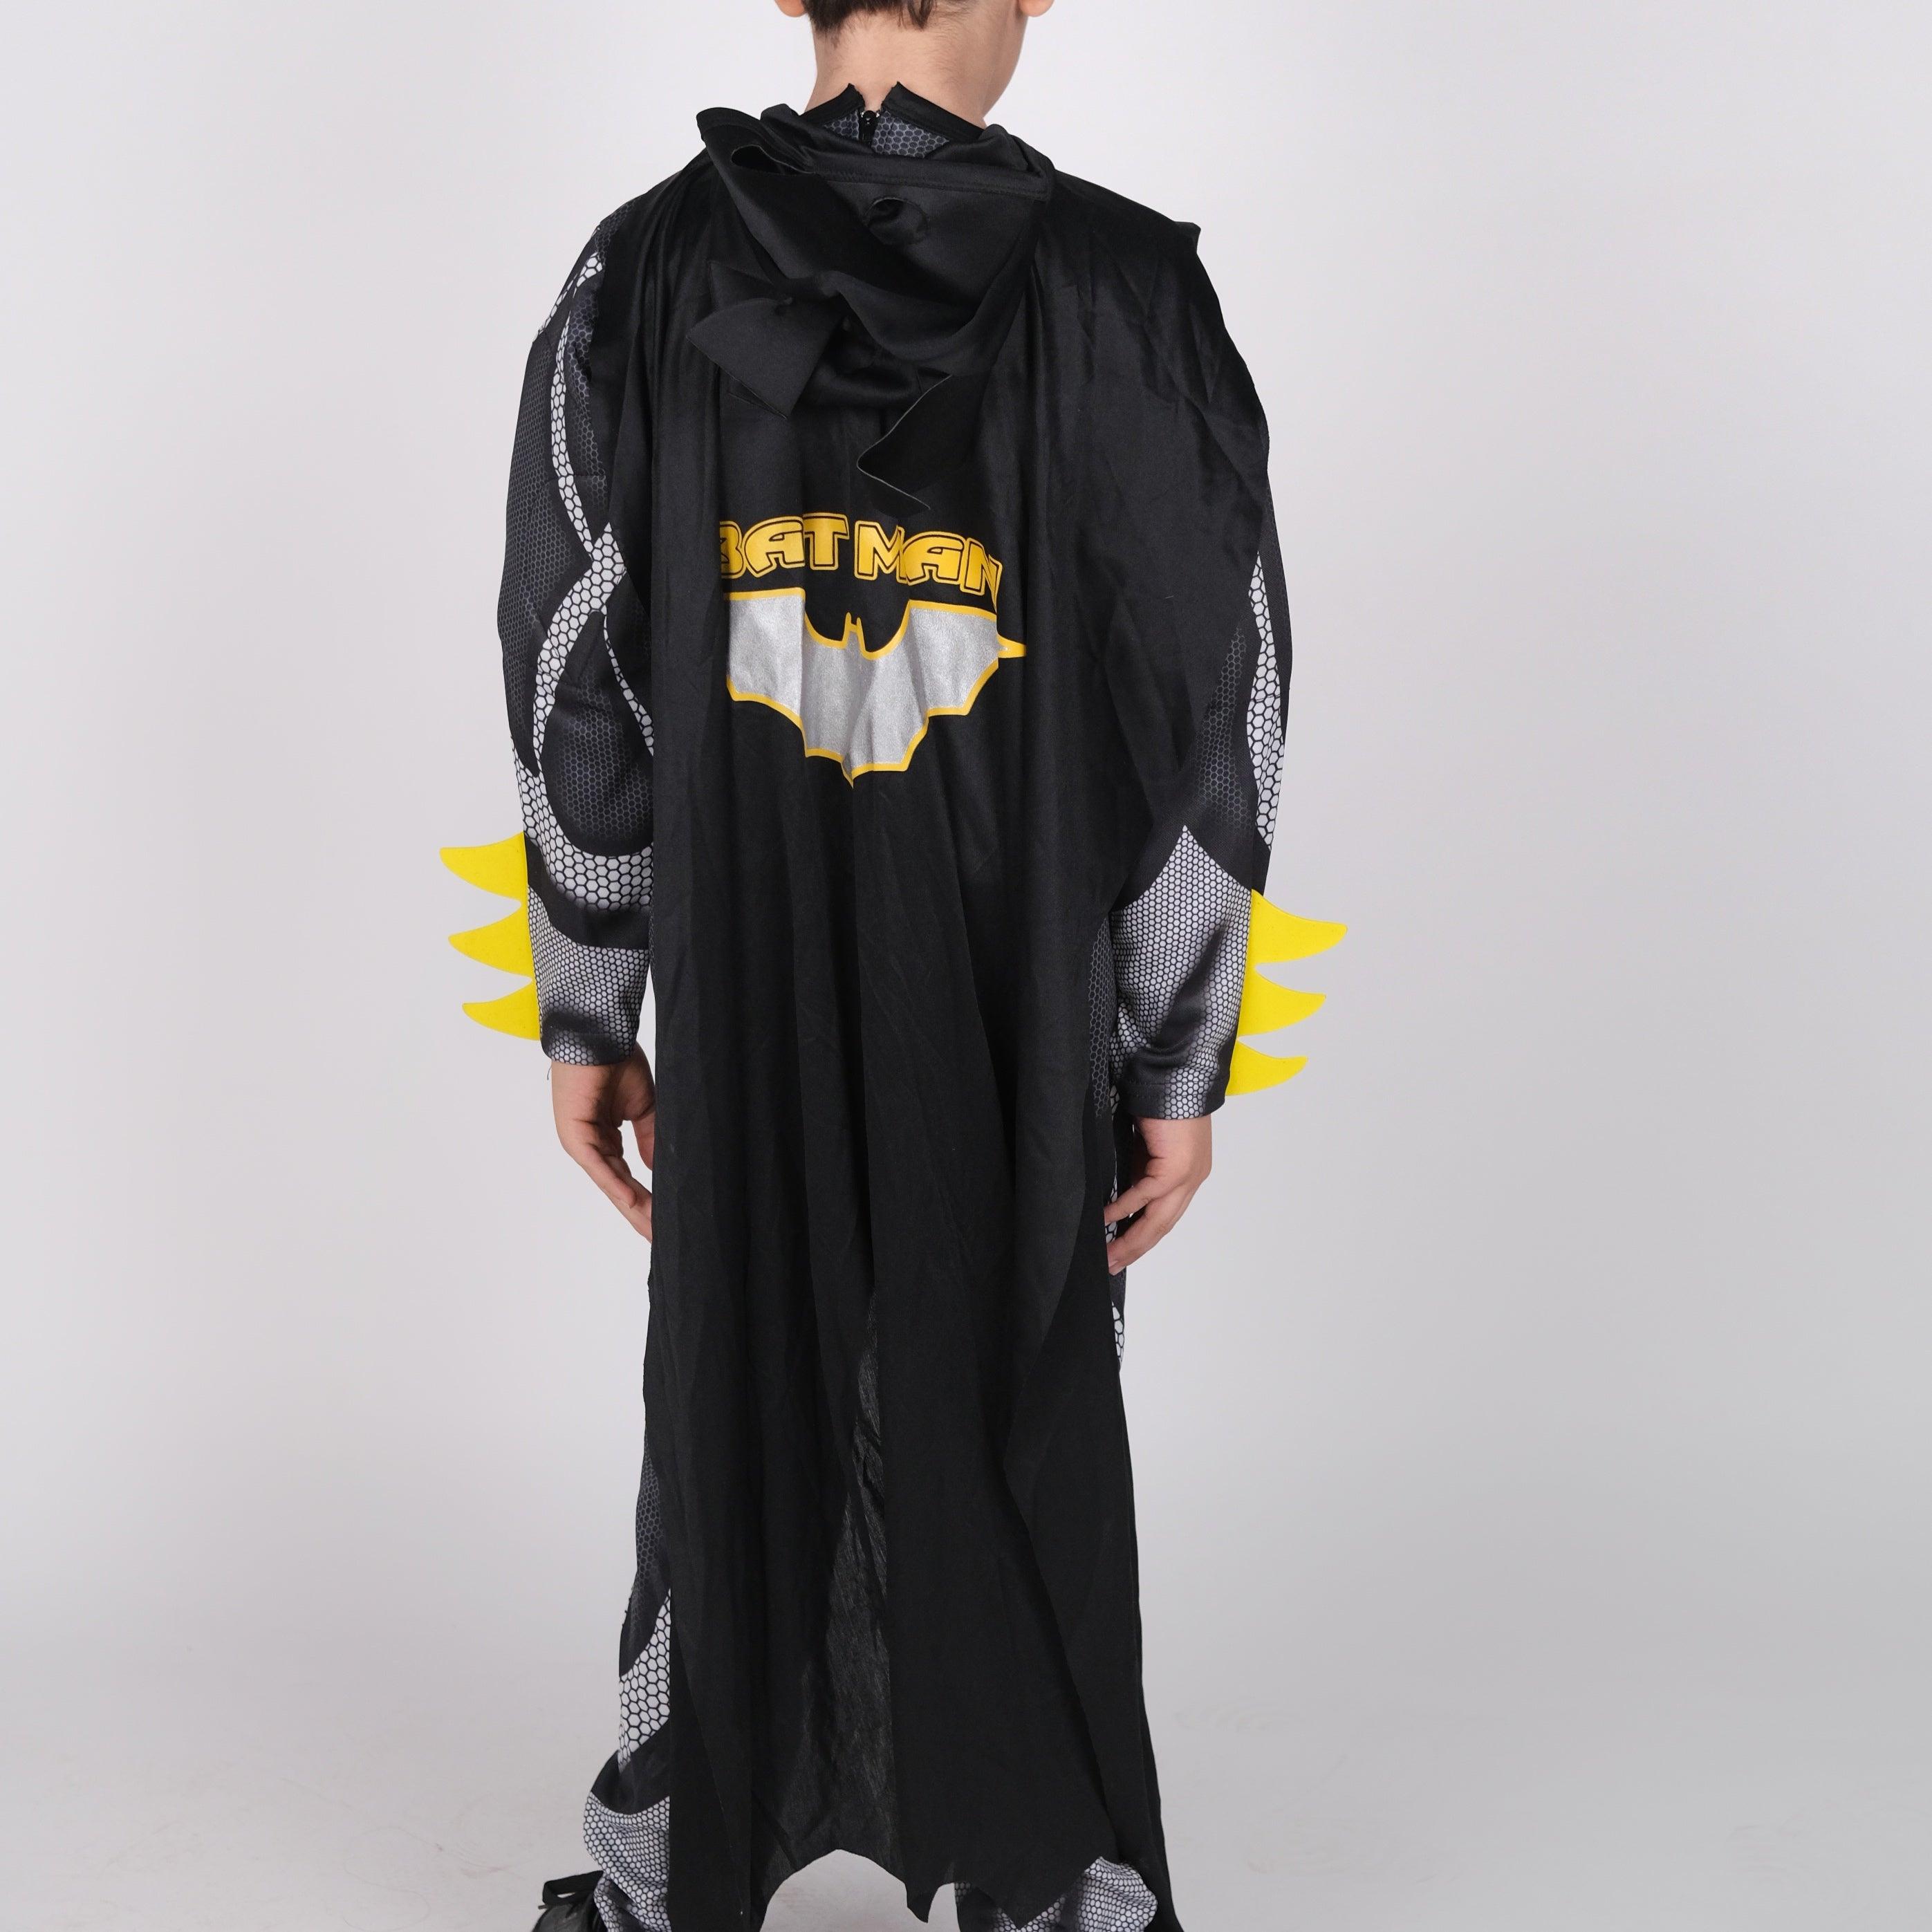 Batman Costume - Ourkids - The Party Animals